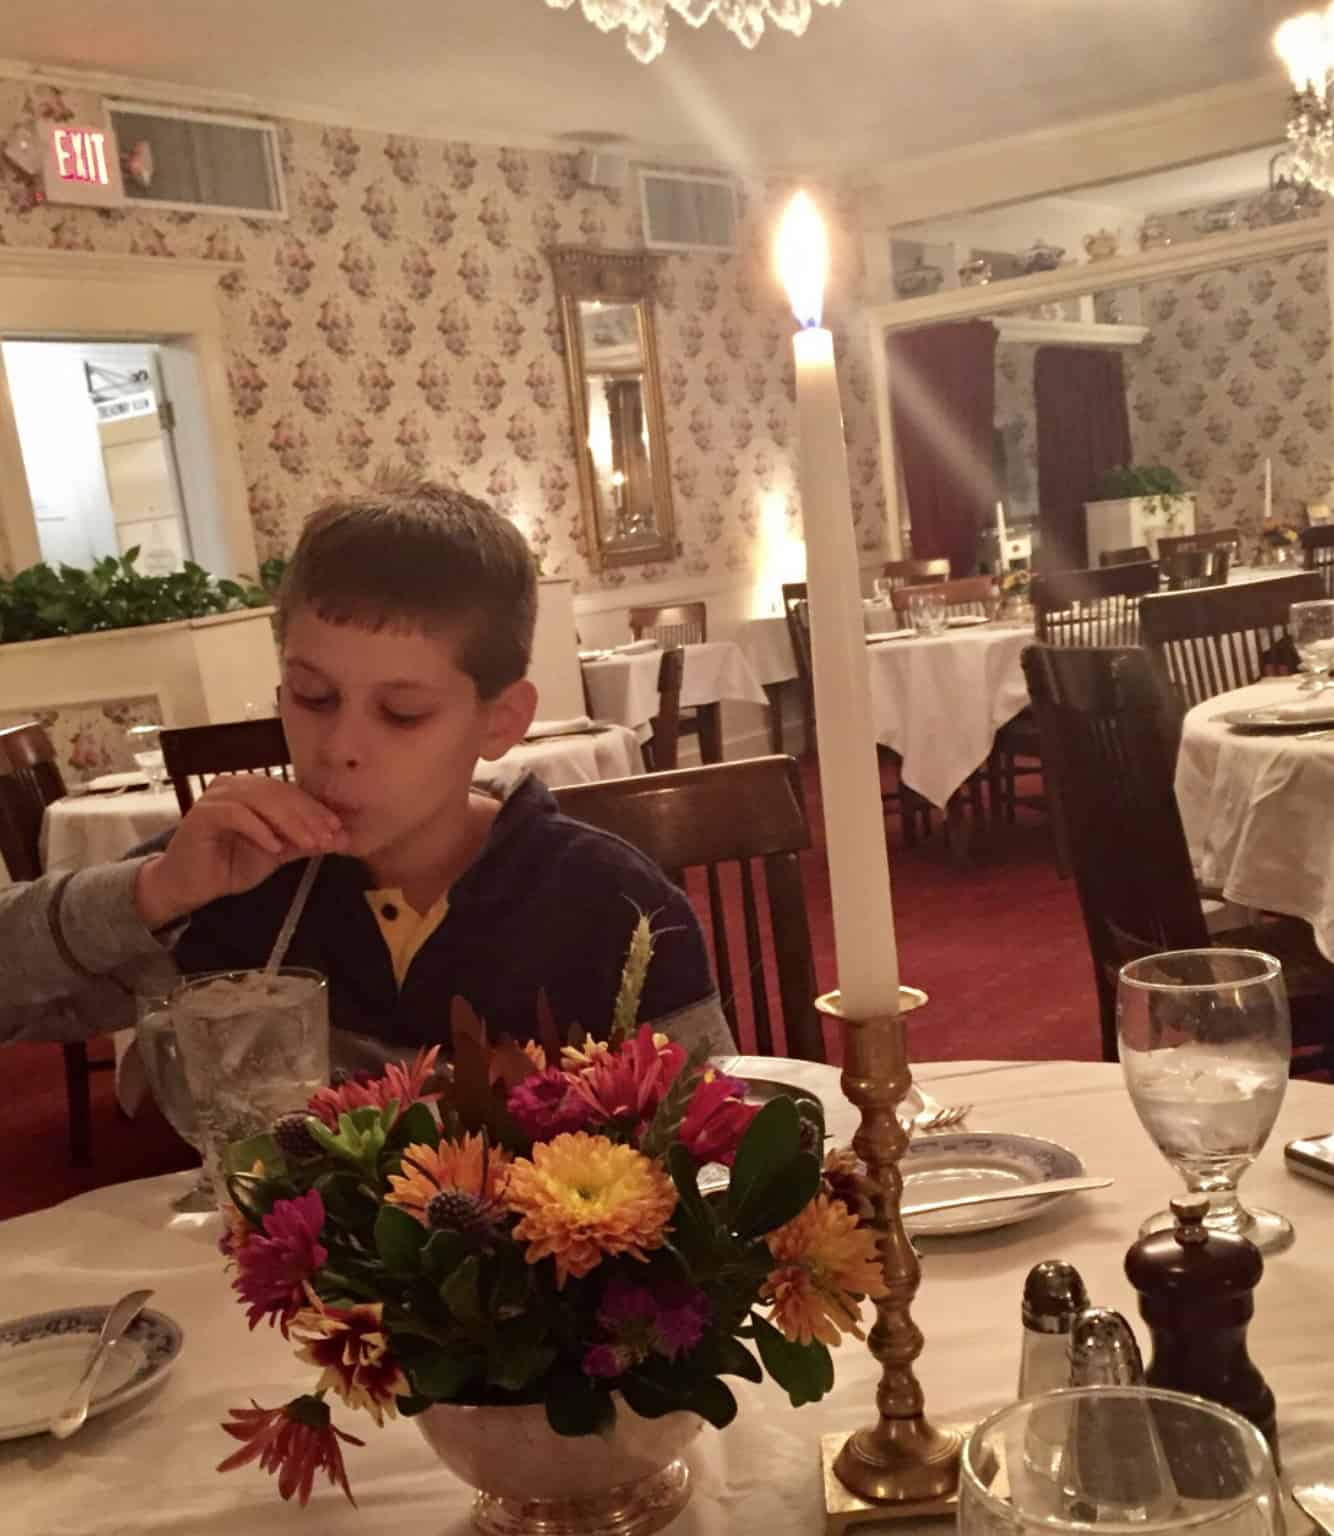 Dining out in a fancy resaurant with autism